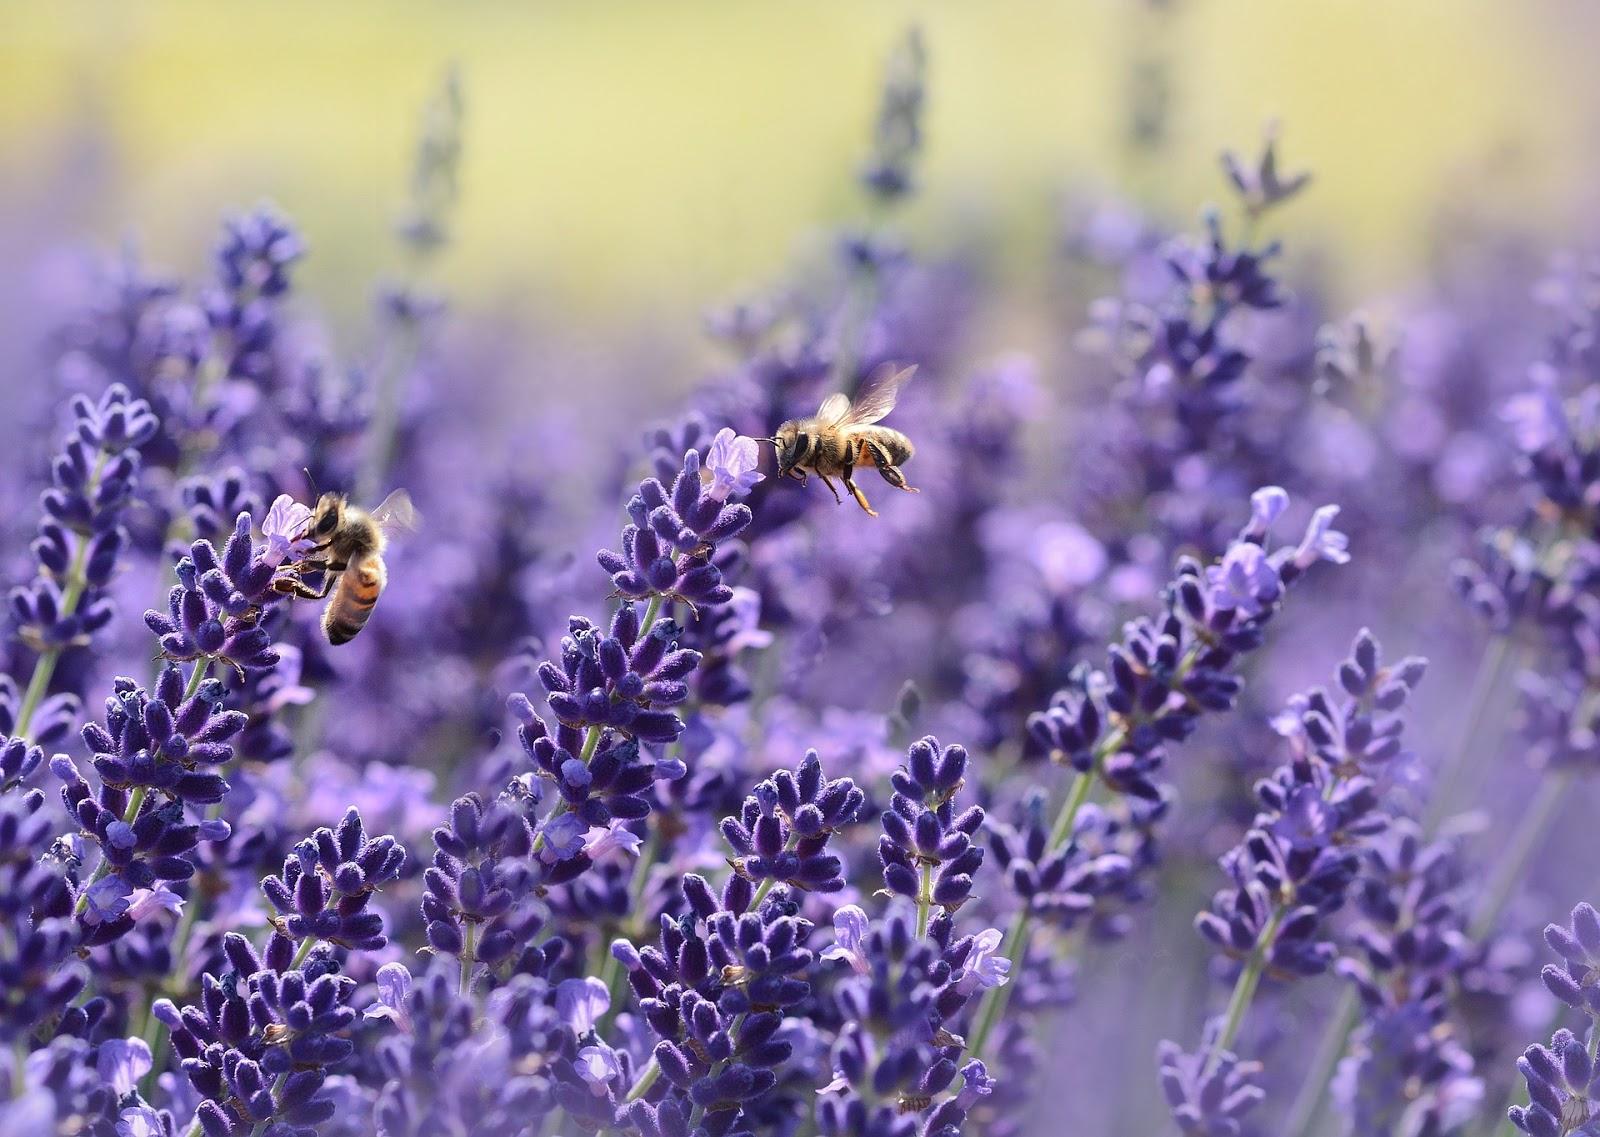 “Lavender Bee Summer” by Rebekka D from Pixabay